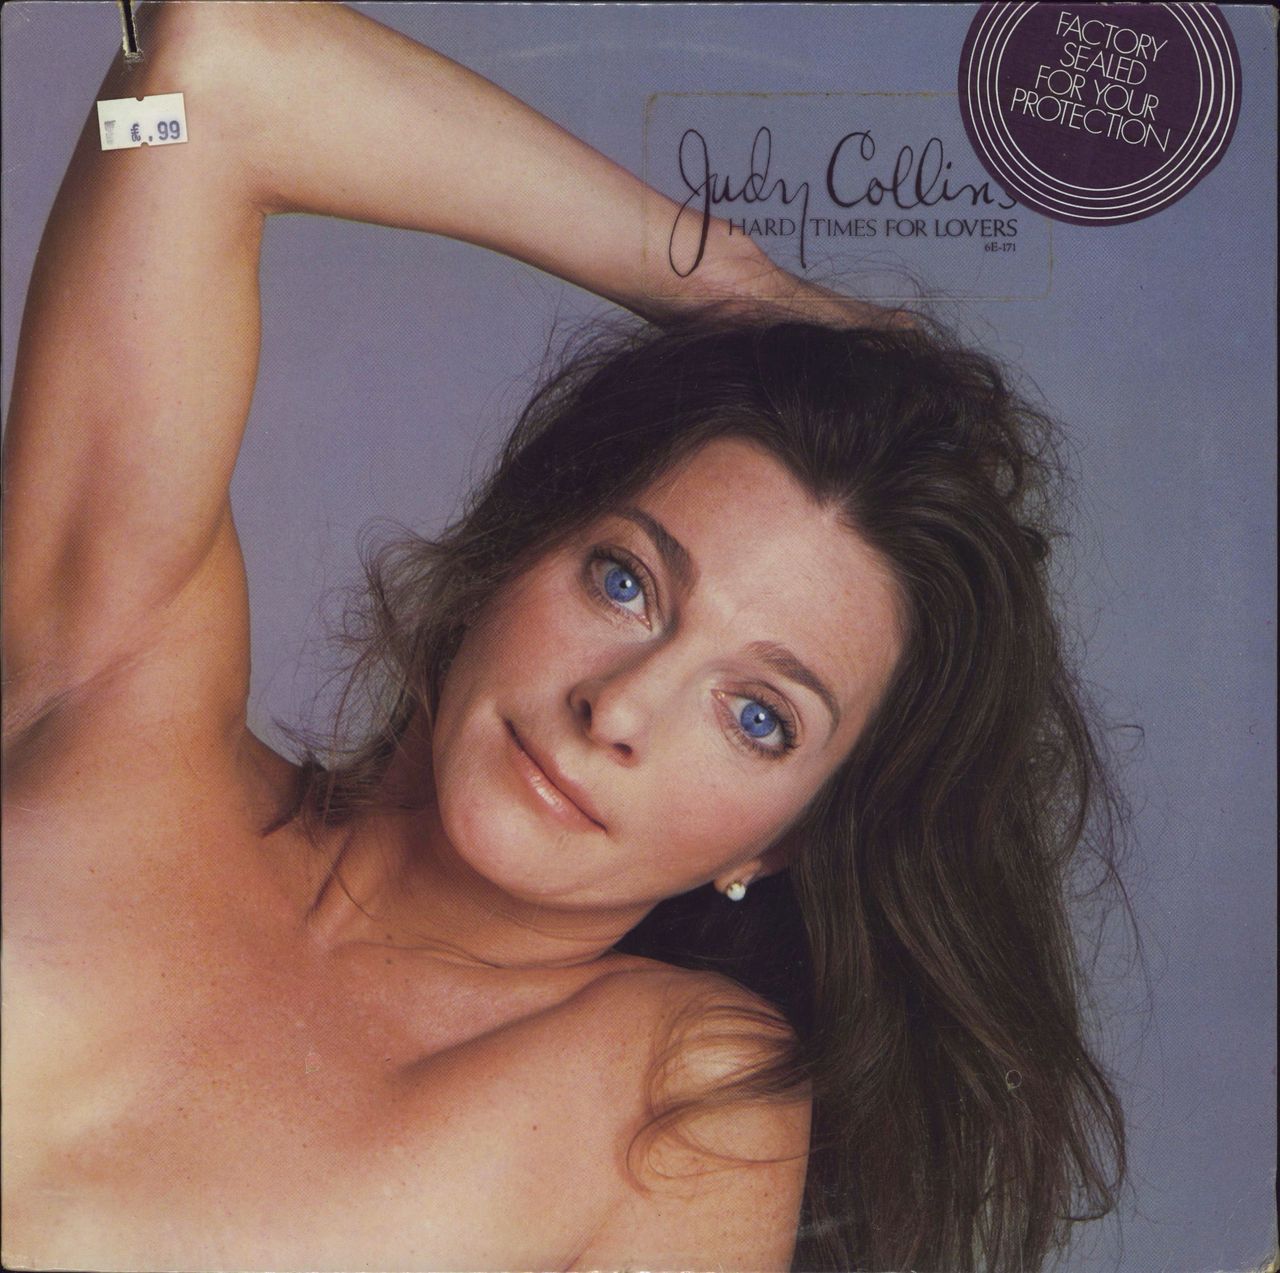 Judy Collins Hard Times For Lovers - Sealed US vinyl LP album (LP record) 6E-171